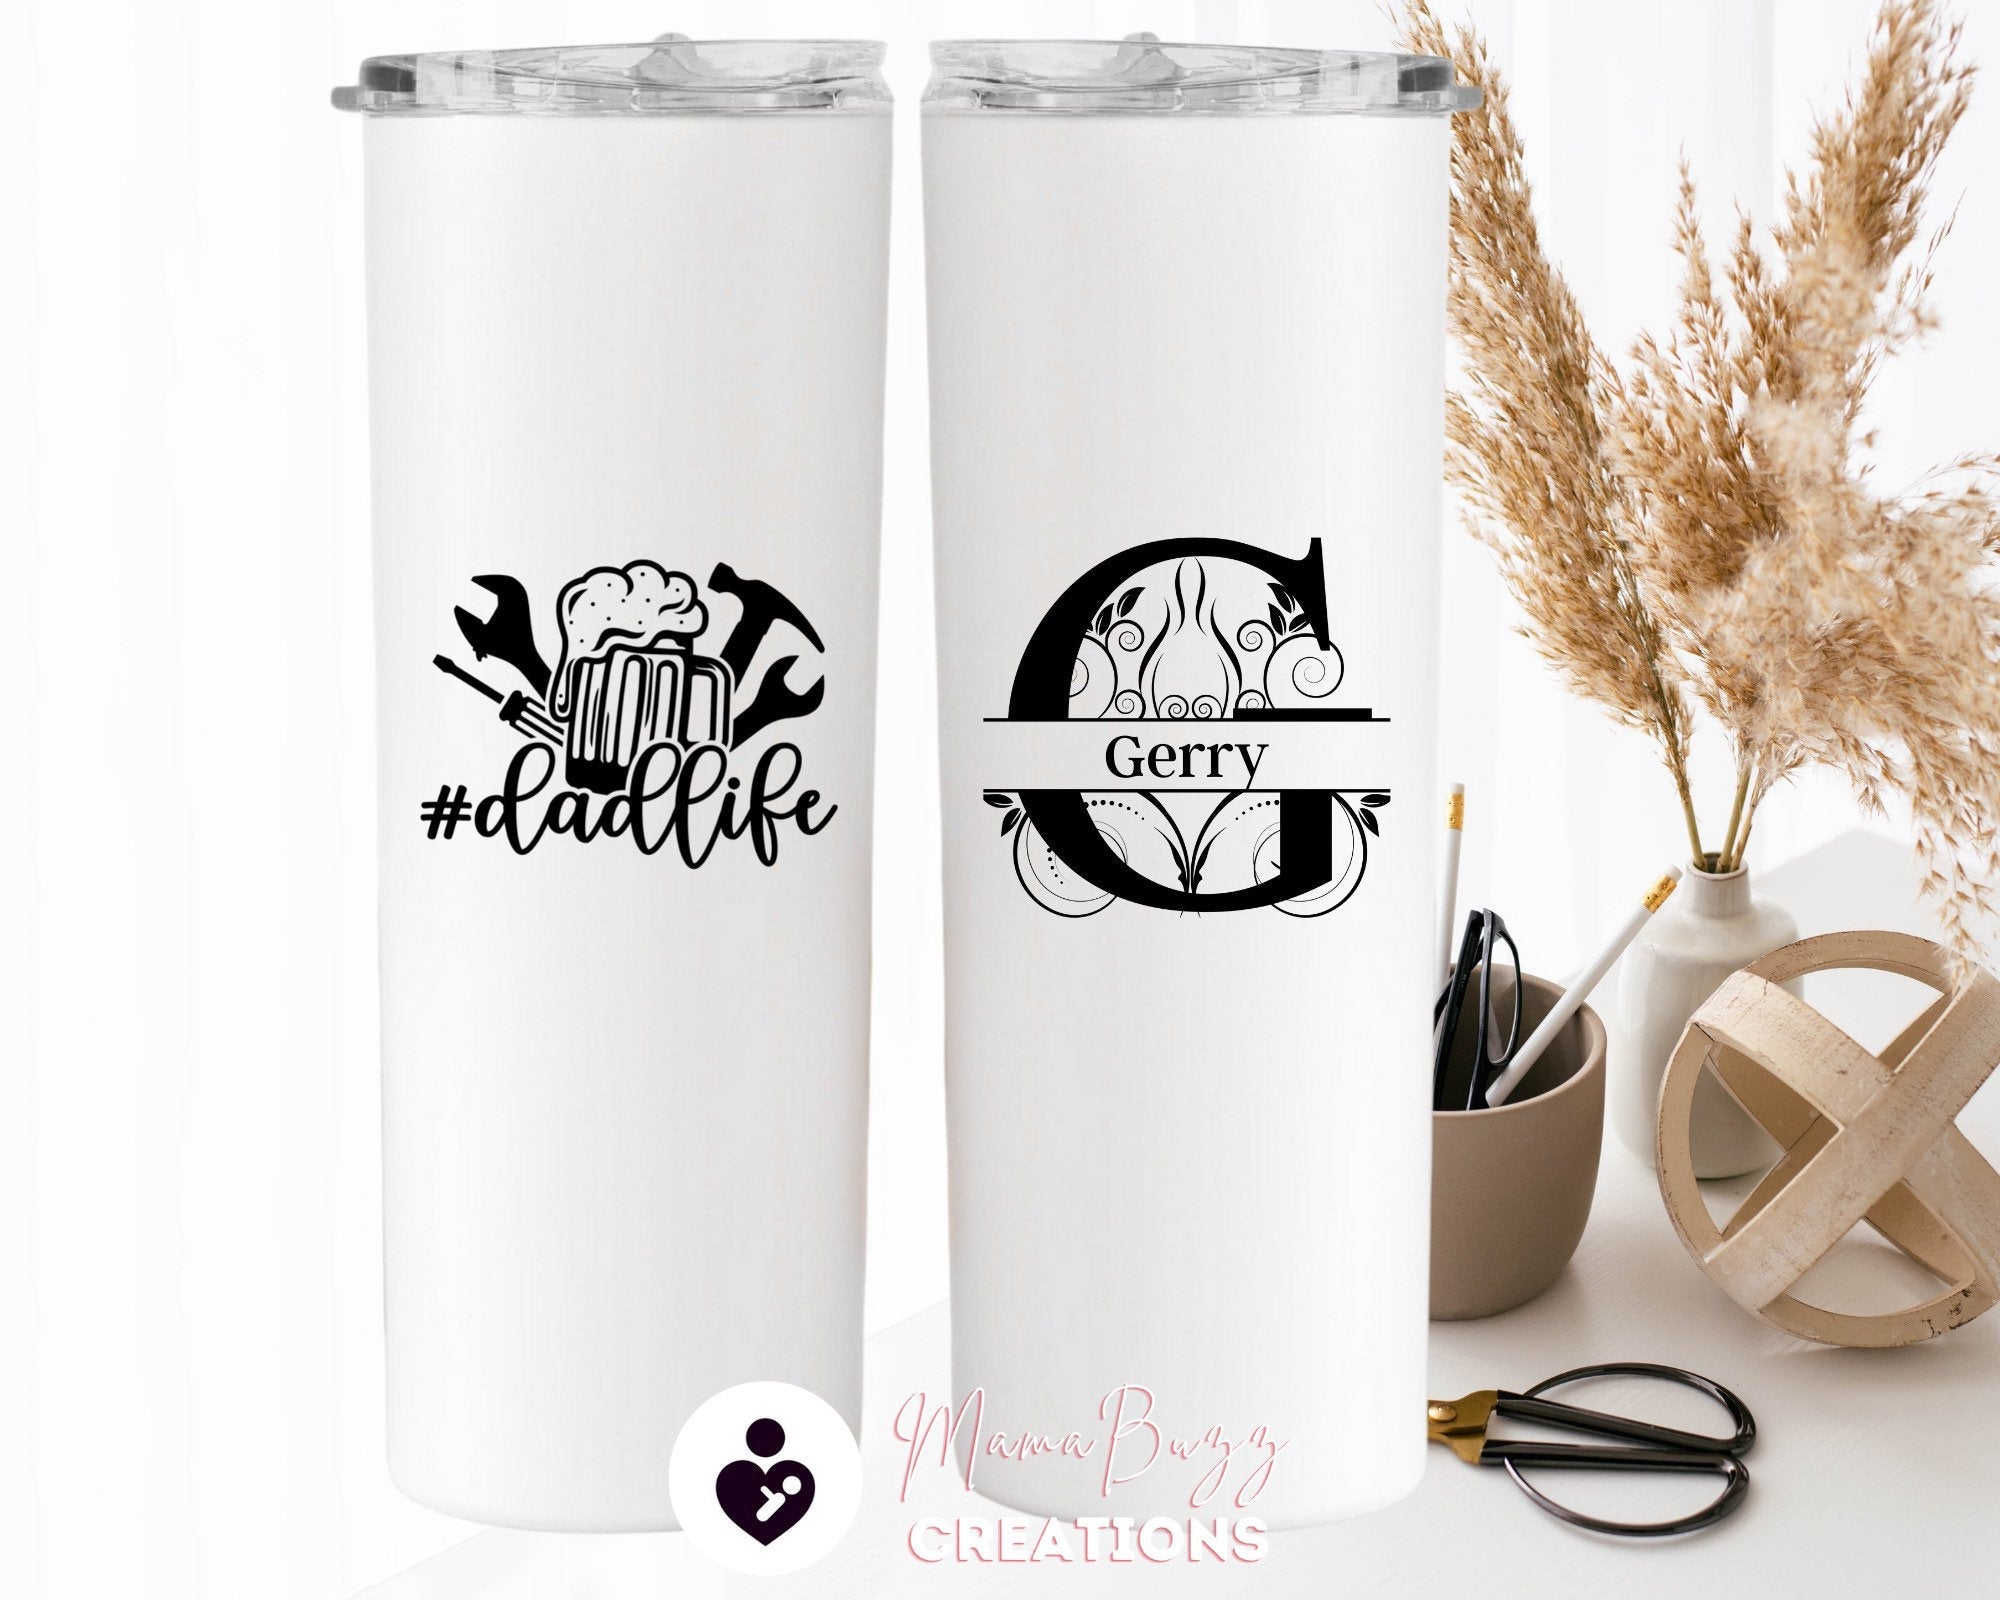 The Lawn Ranger,Custom Tumbler,Gifts for Dad, Father’s Day, Gifts for Him, Birthday Gift, Father’s Day Gift, Anniversary Gifts,Dad Gifts - MamaBuzz Creations